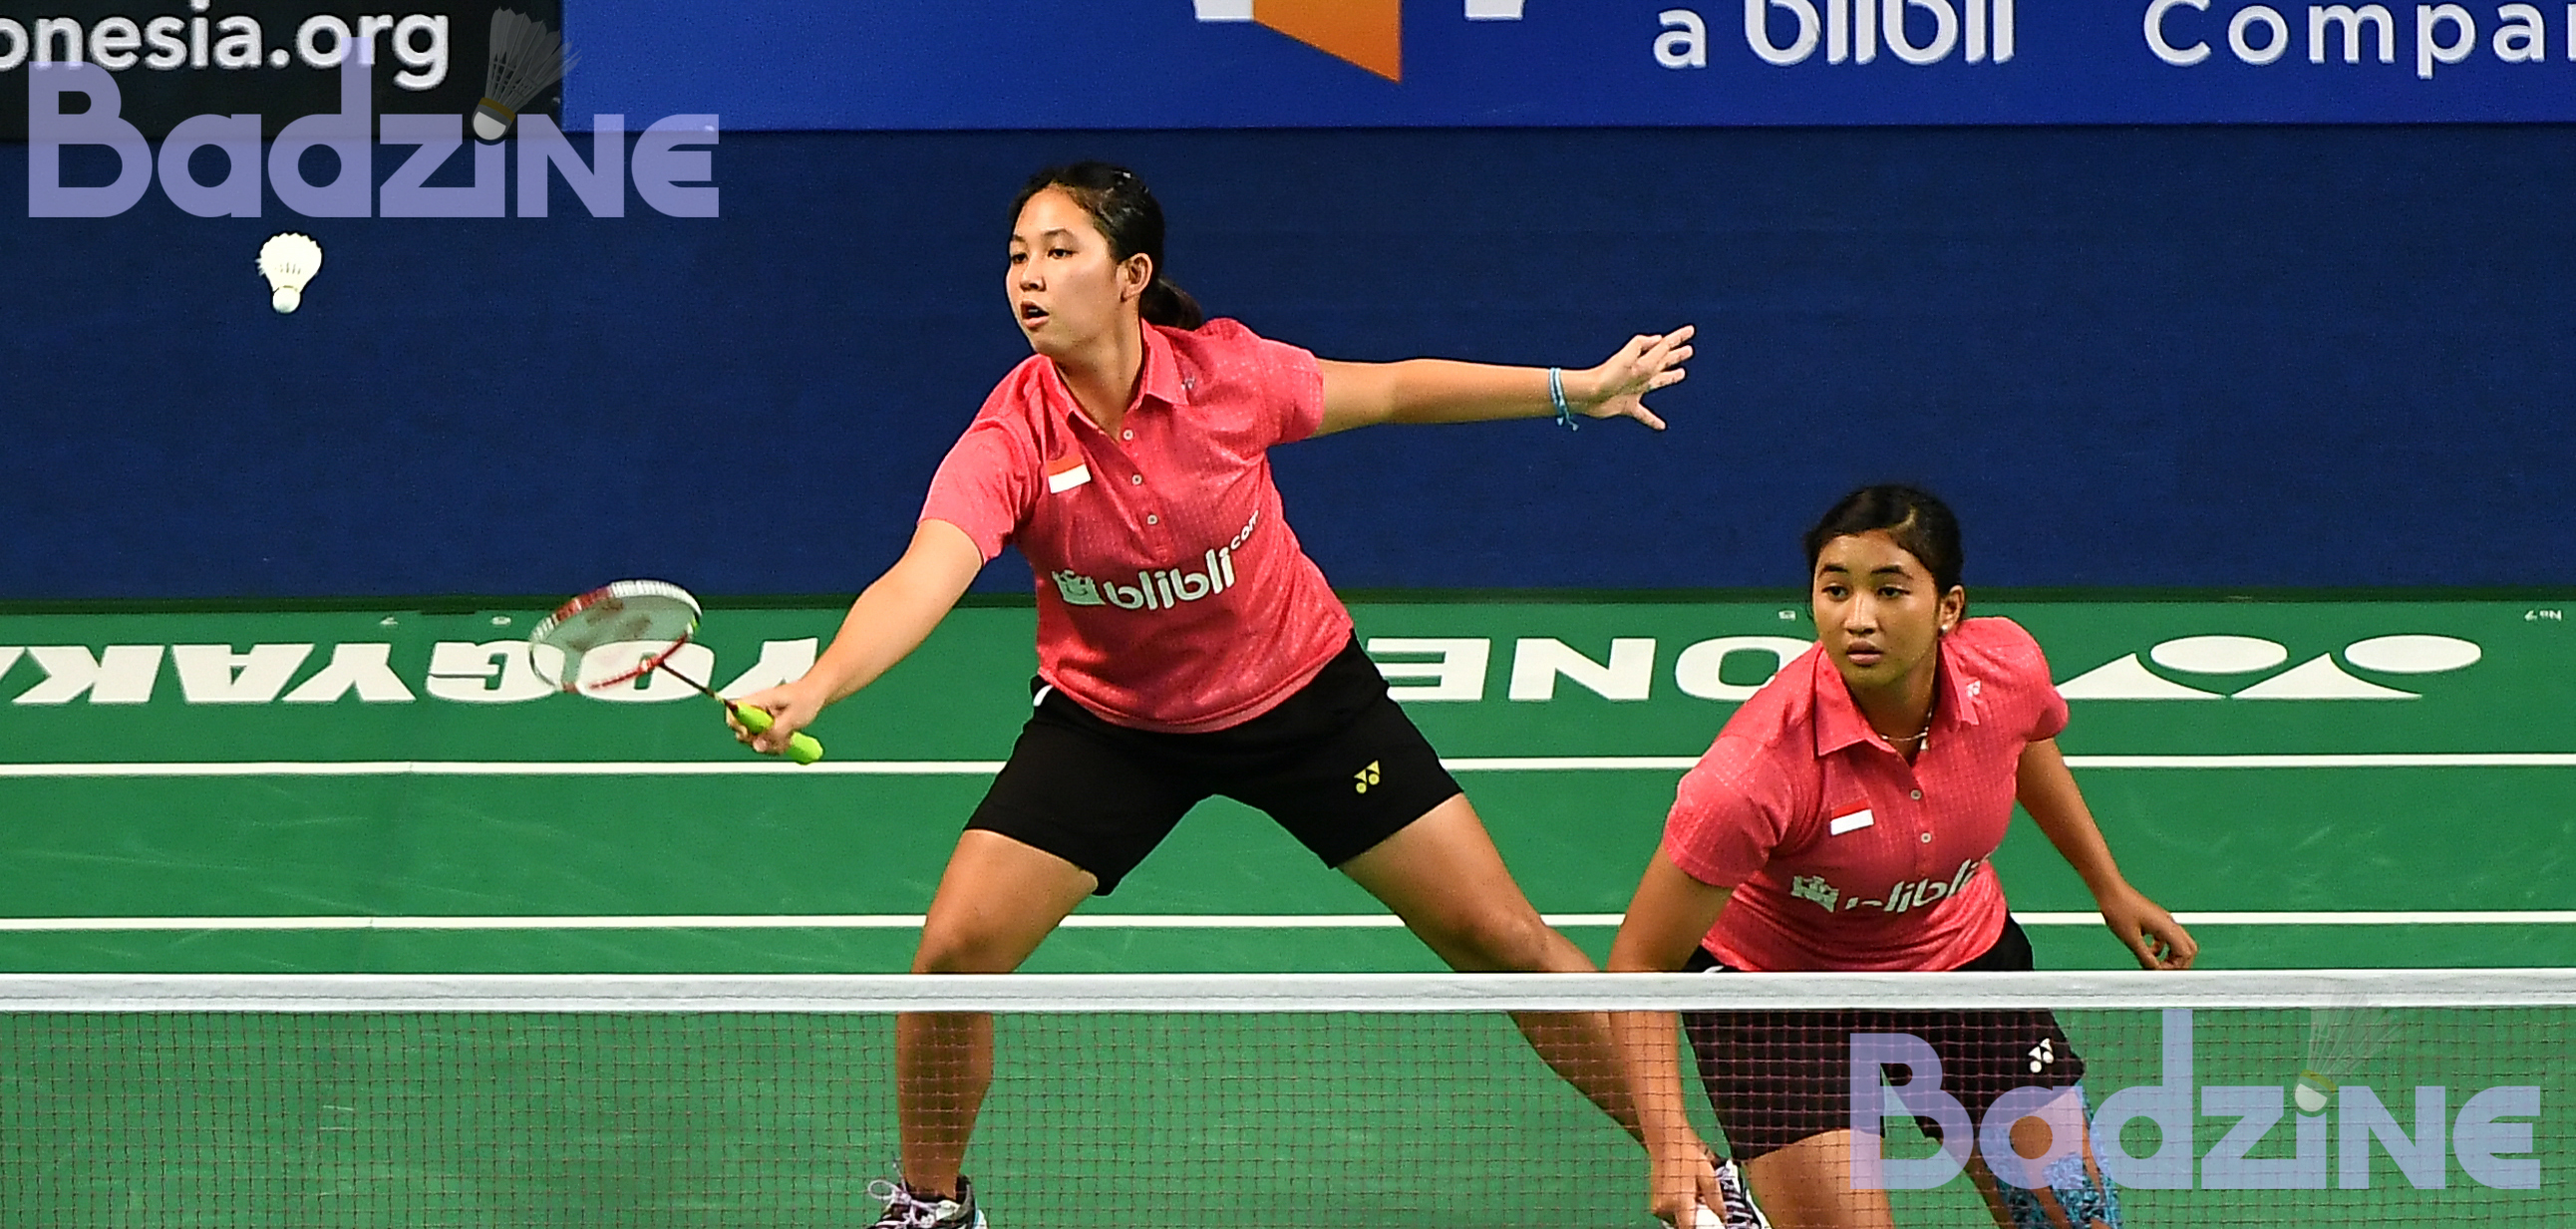 Indonesian mixed shuttlers booked one title and hope for a record of 3 as the World Junior Championship finals loom. By Don Hearn.  Photos: Robertus Pudyanto / Badmintonphoto (live) Two […]